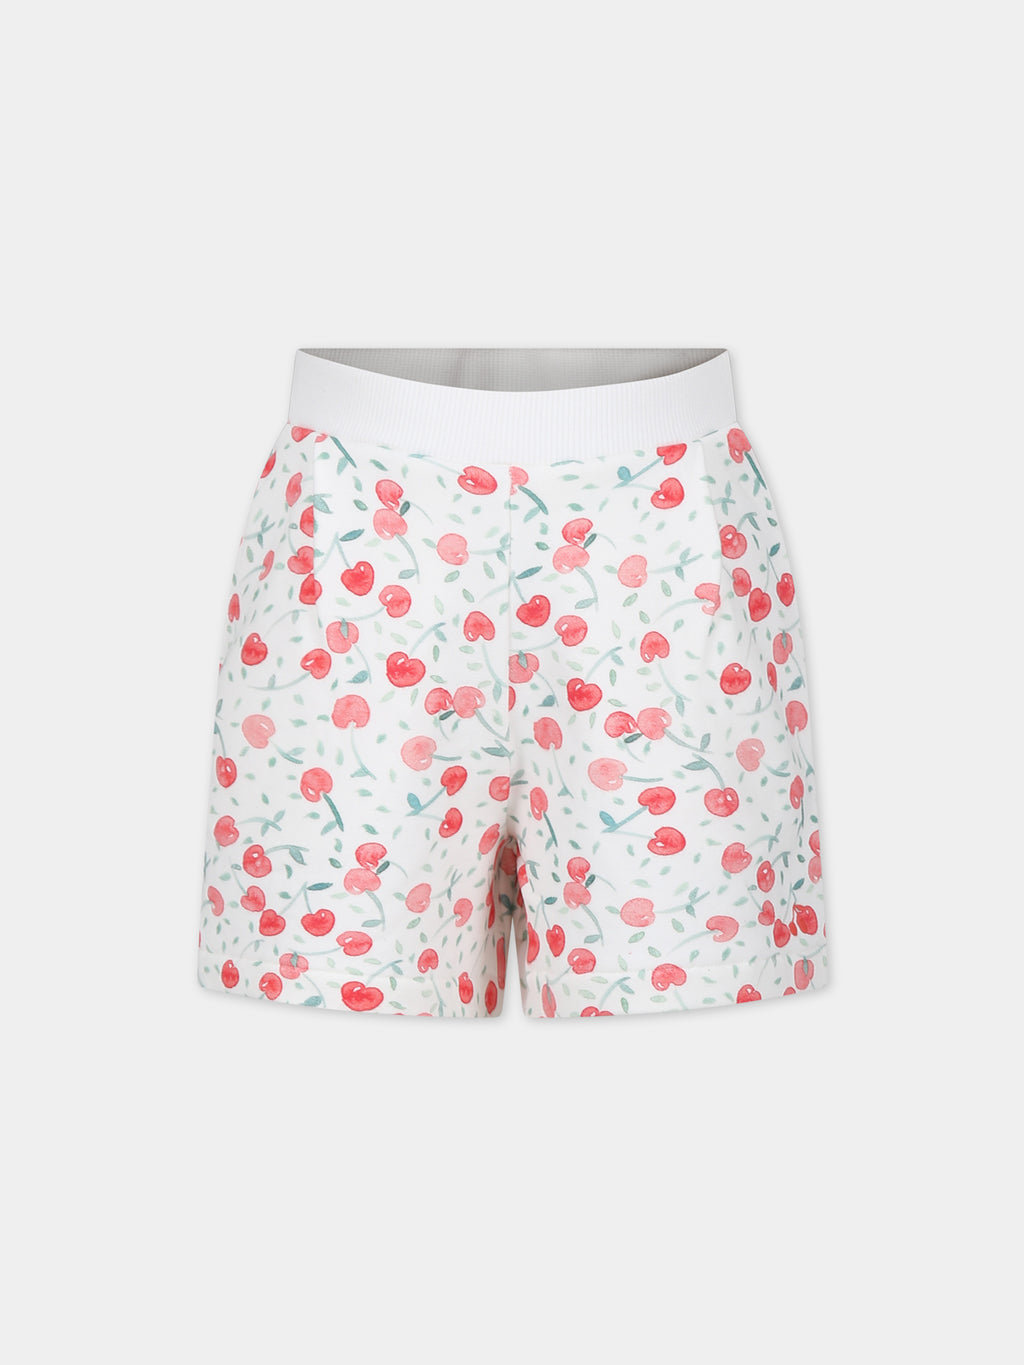 Ivory sports shorts for girl with cherries